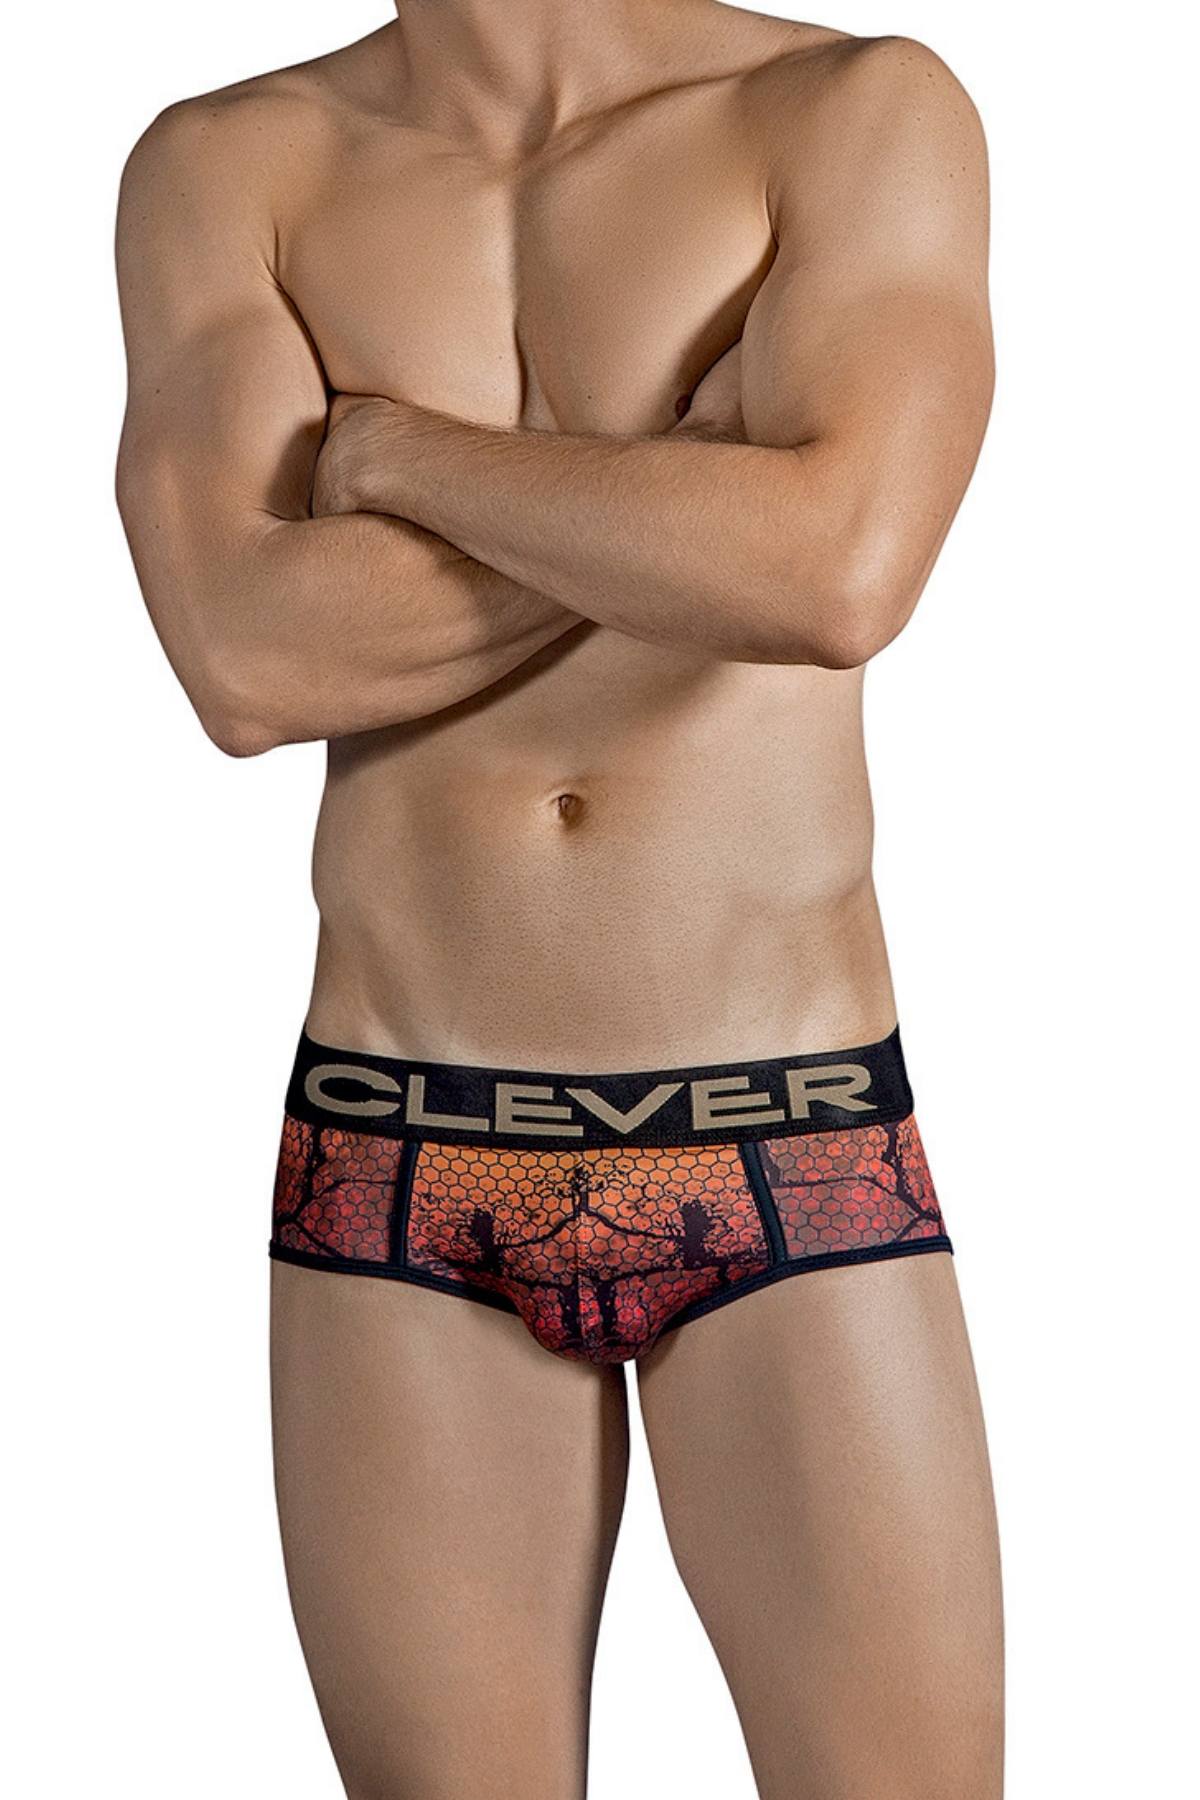 Clever Black Chameleon Piping Brief